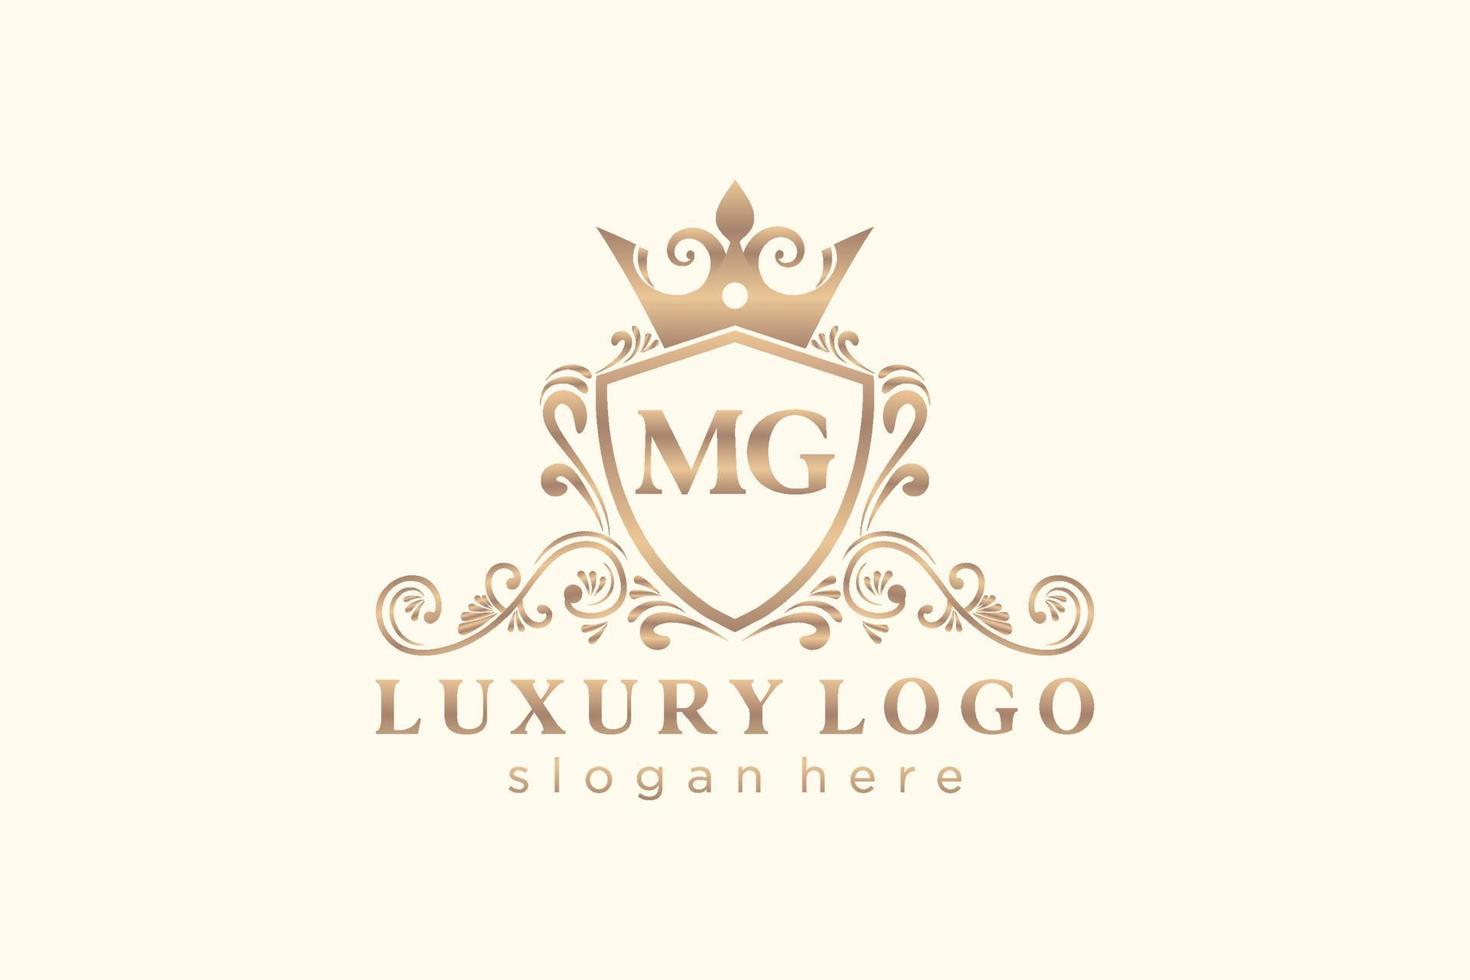 Initial MG Letter Royal Luxury Logo template in vector art for Restaurant, Royalty, Boutique, Cafe, Hotel, Heraldic, Jewelry, Fashion and other vector illustration.